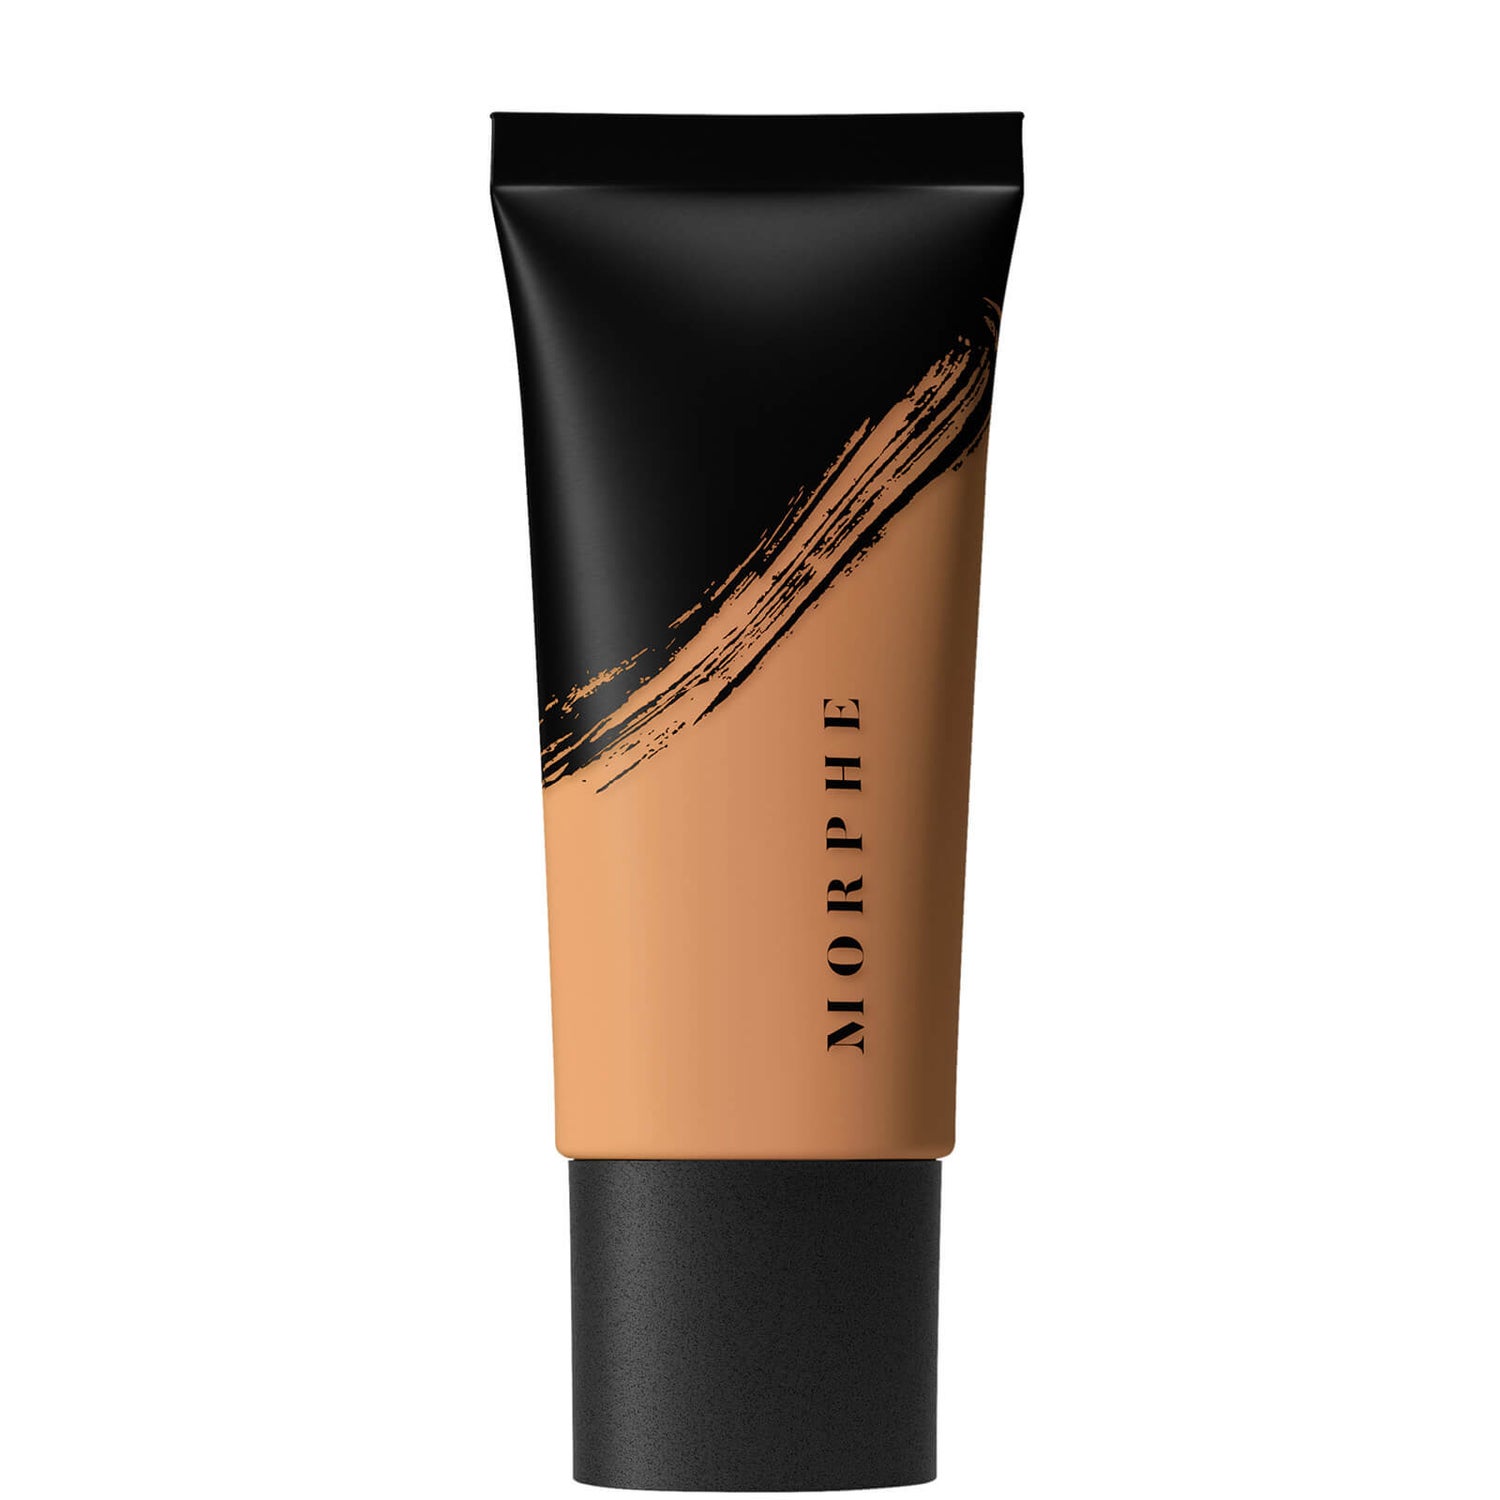 Morphe Fluidity Full Coverage Foundation Cult Beauty